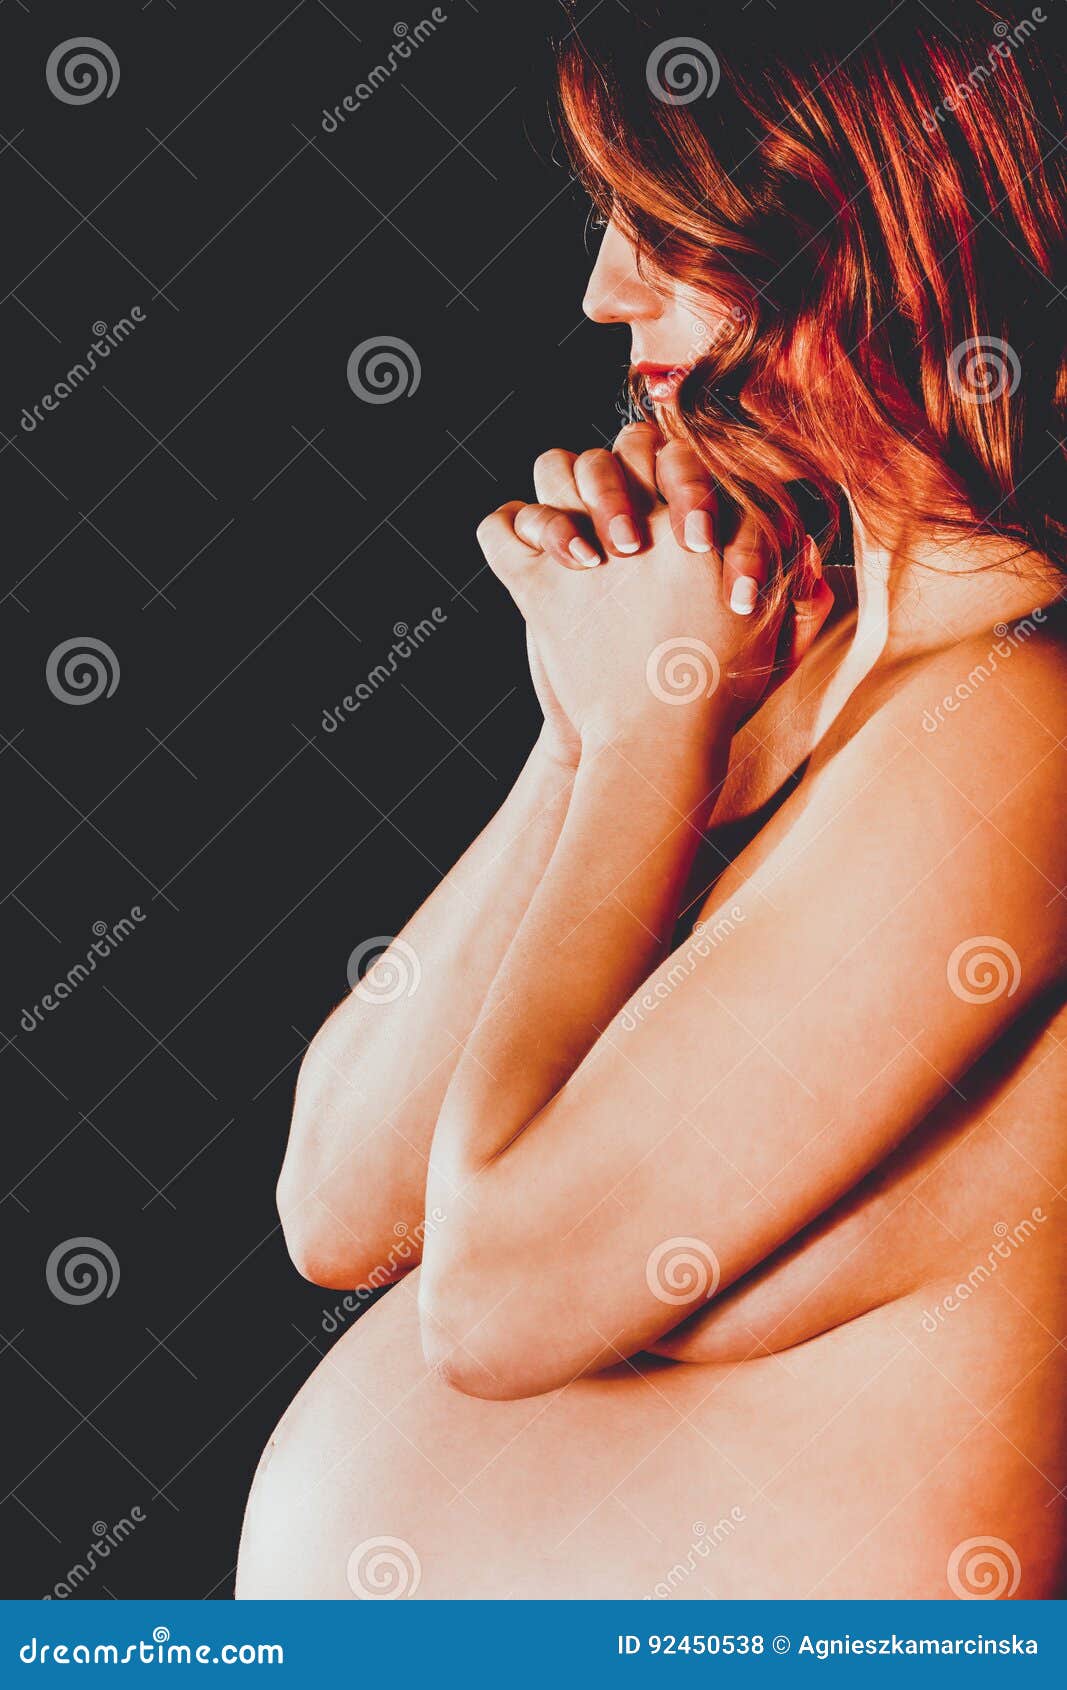 Red Hair Prego Nude - Young Naked Pregnant Woman Praying Stock Photo - Image of ...